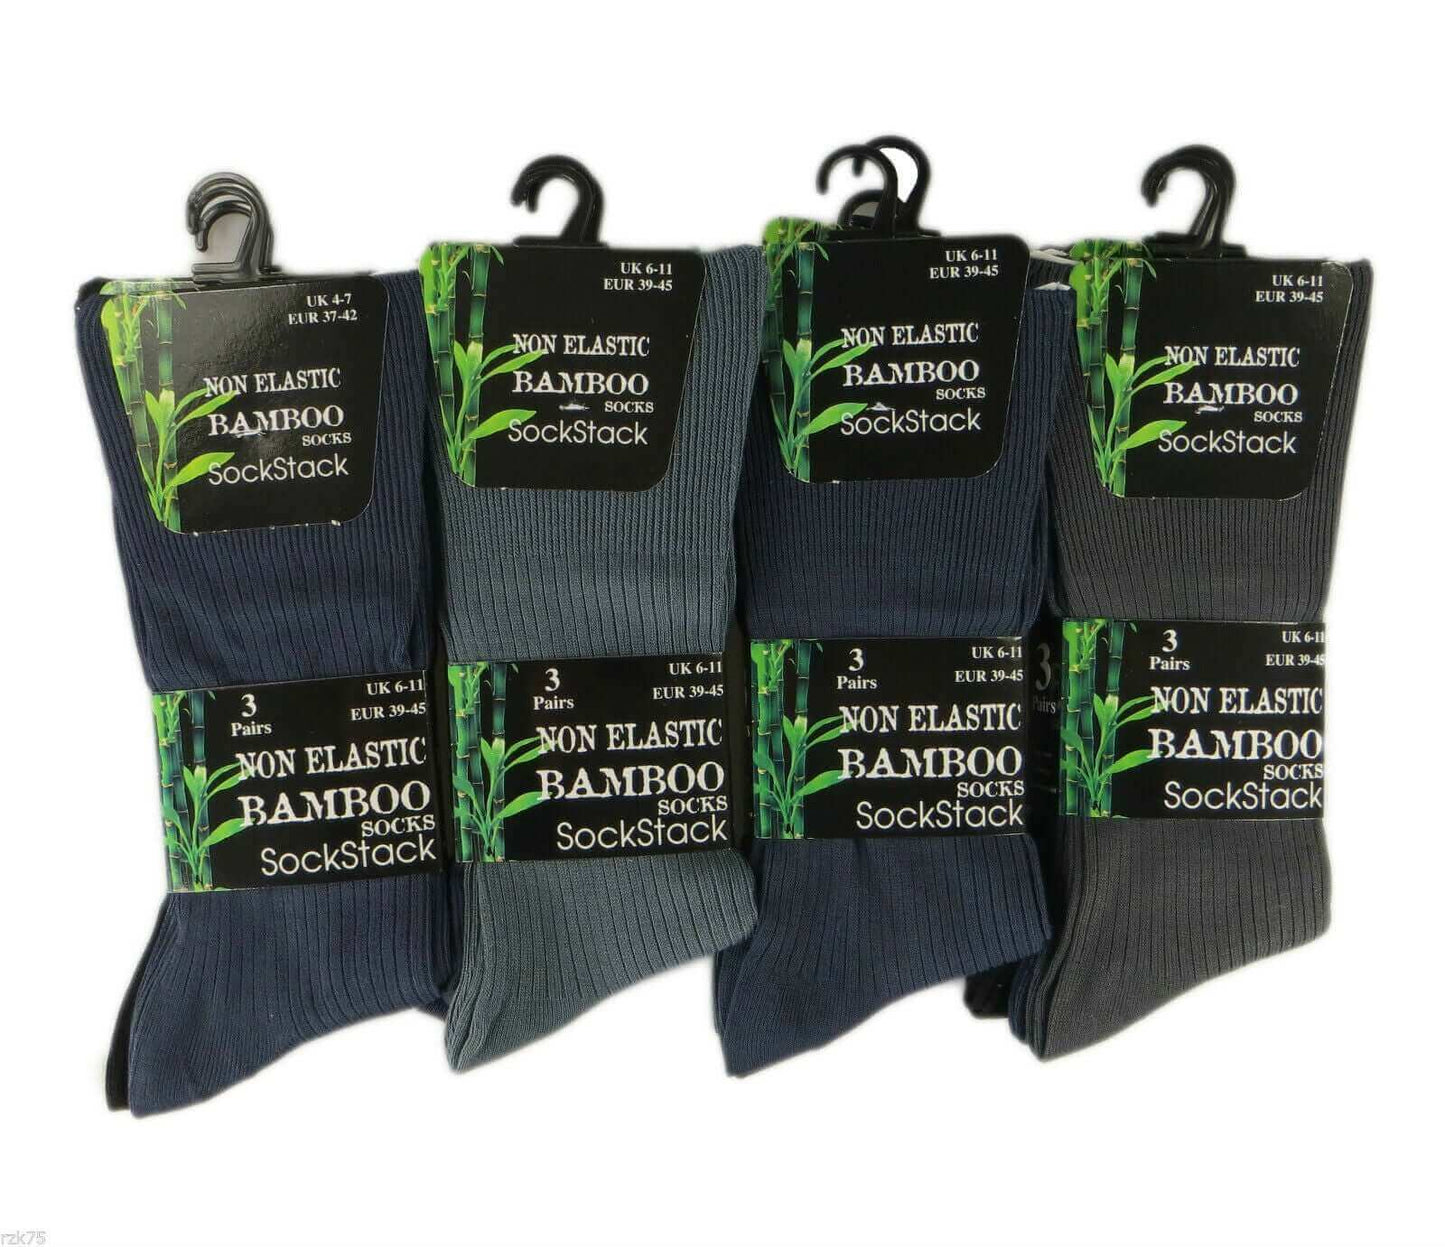 6 Pairs Of Men's Bamboo Loose Top Socks, Soft Grip Anti Bacterial Socks. Buy now for £7.00. A Socks by Sock Stack. 6-11, anti bacterial, anti blister, assorted, athletics, bamboo, baselayer, black, boys, comfortable, cosy, cotton, dark assorted, diabetic,